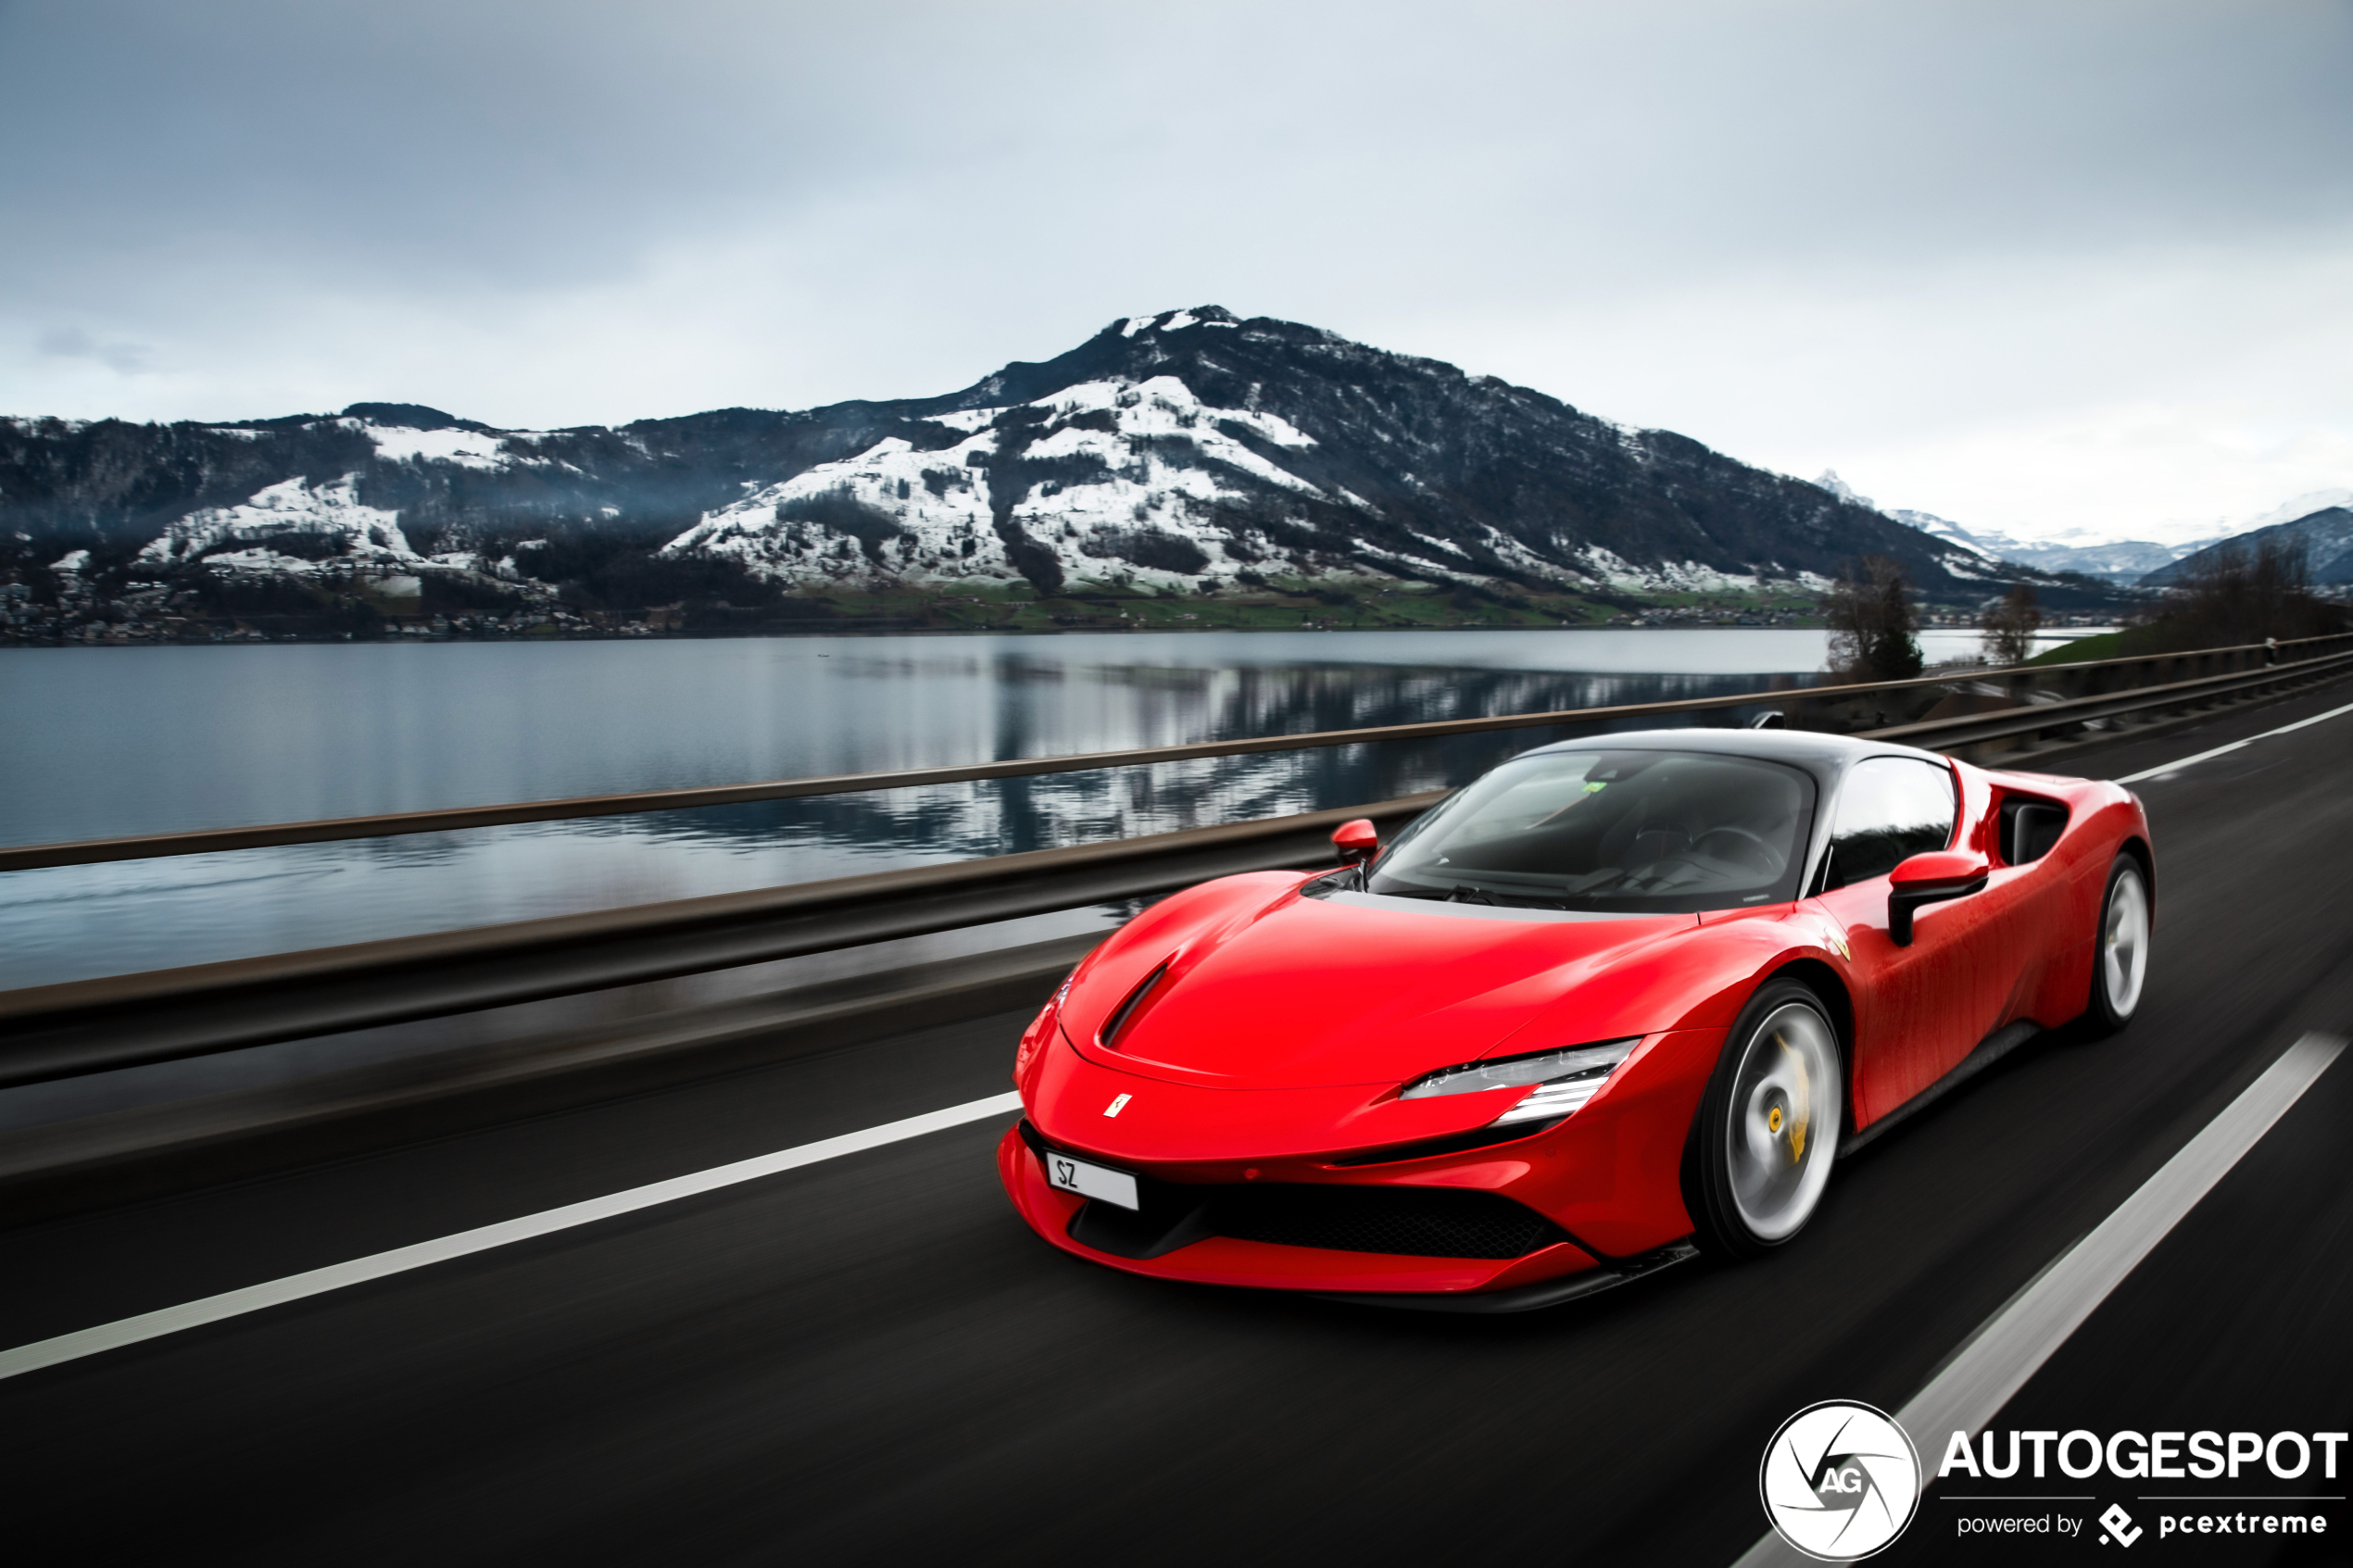 We have never seen the Ferrari SF90 Stradale so good before!